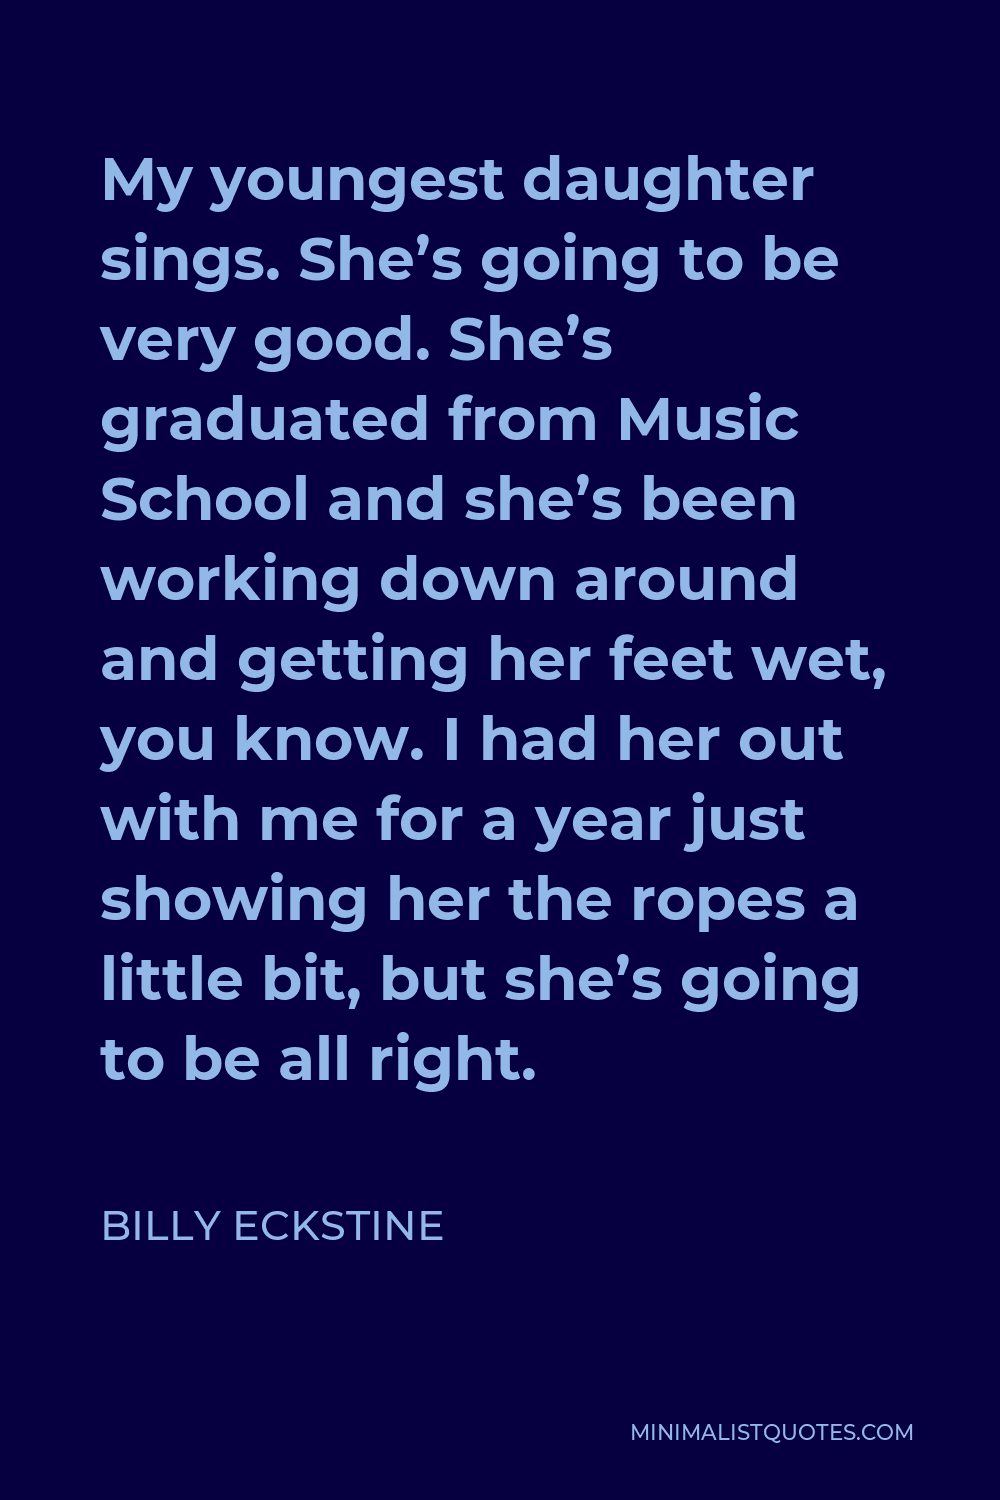 Billy Eckstine Quote - My youngest daughter sings. She’s going to be very good. She’s graduated from Music School and she’s been working down around and getting her feet wet, you know. I had her out with me for a year just showing her the ropes a little bit, but she’s going to be all right.